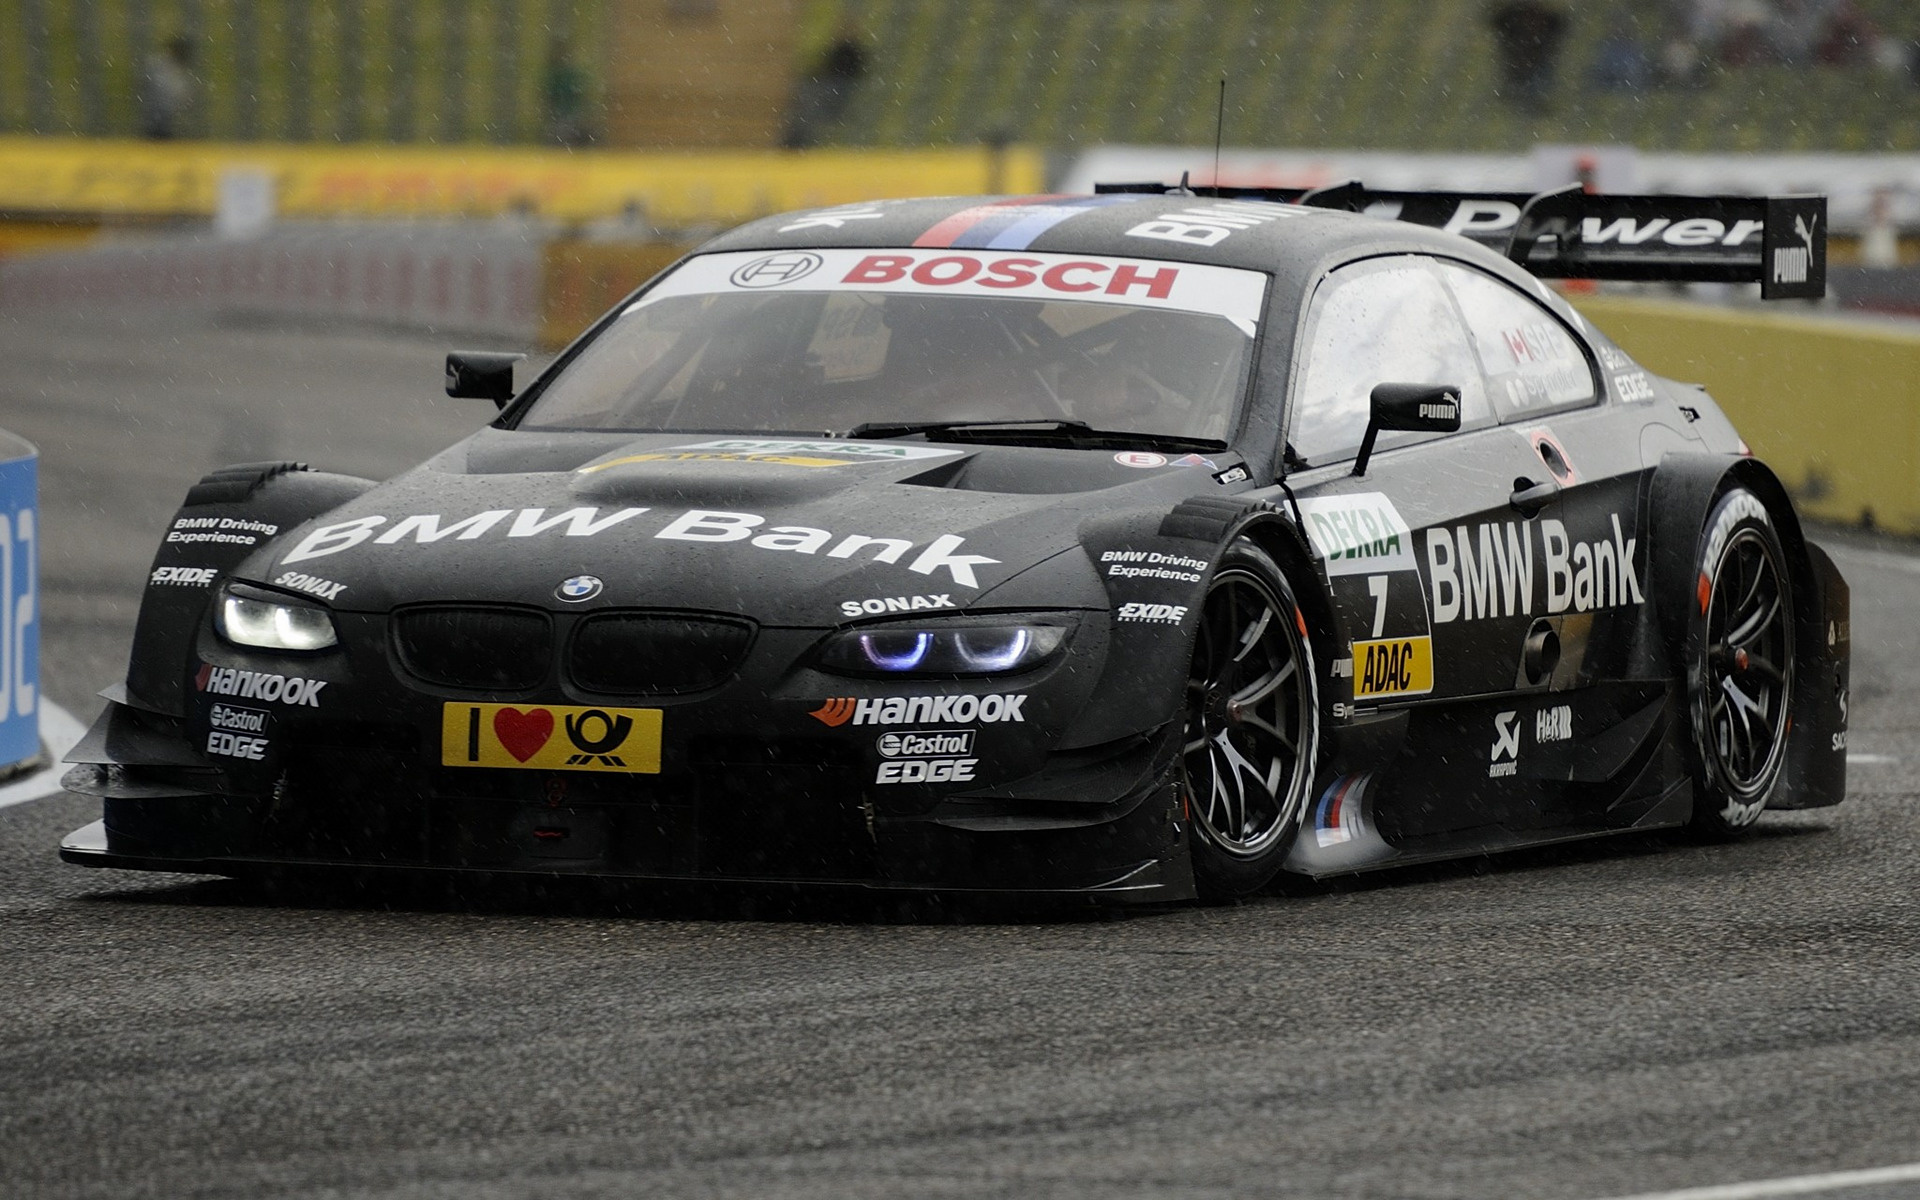 The Ultimate Racing Machine: 2012 BMW M3 DTM Champion Edition